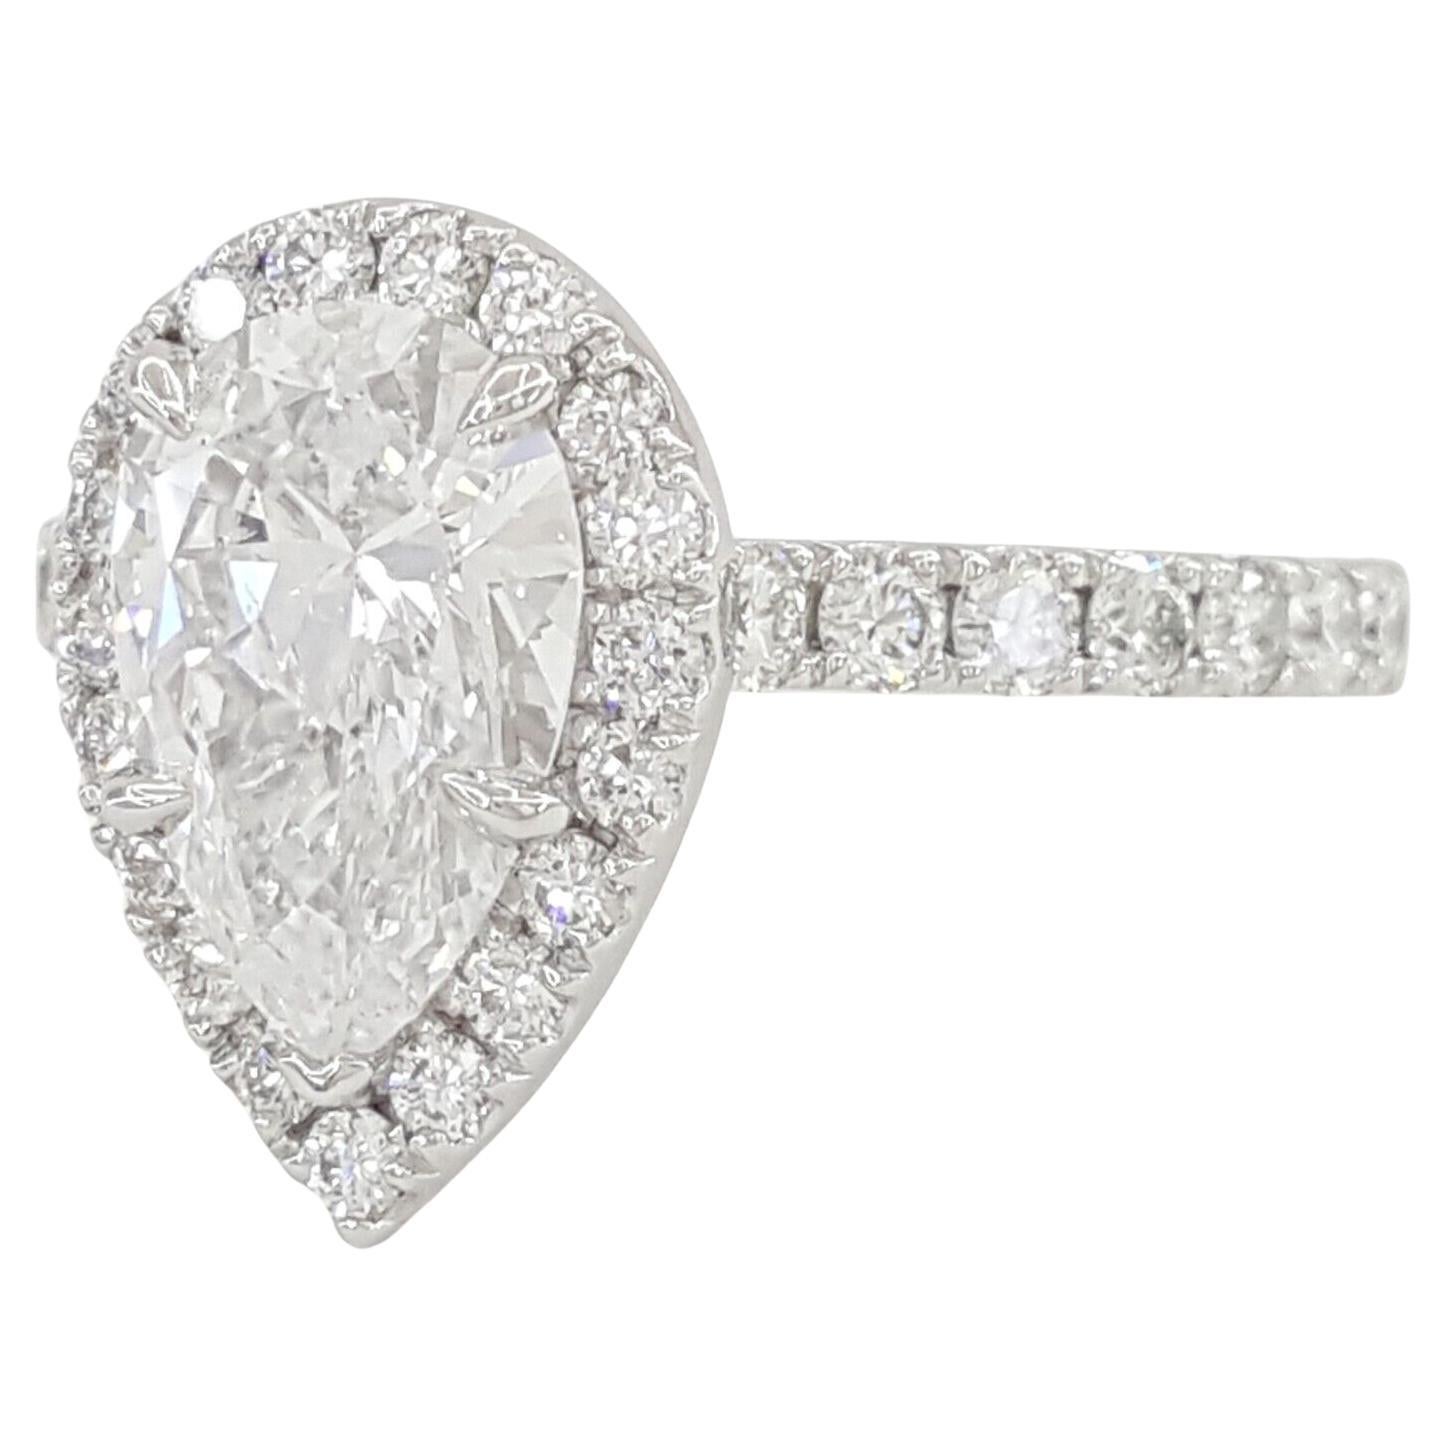 Platinum encases a Pear Brilliant Cut Diamond Halo Engagement Ring with a total weight of 2.43 carats. The ring itself has a weight of 6.3 grams and is sized at 6.25. Its centerpiece is a natural 1.71-carat Pear Brilliant Cut Diamond, boasting D